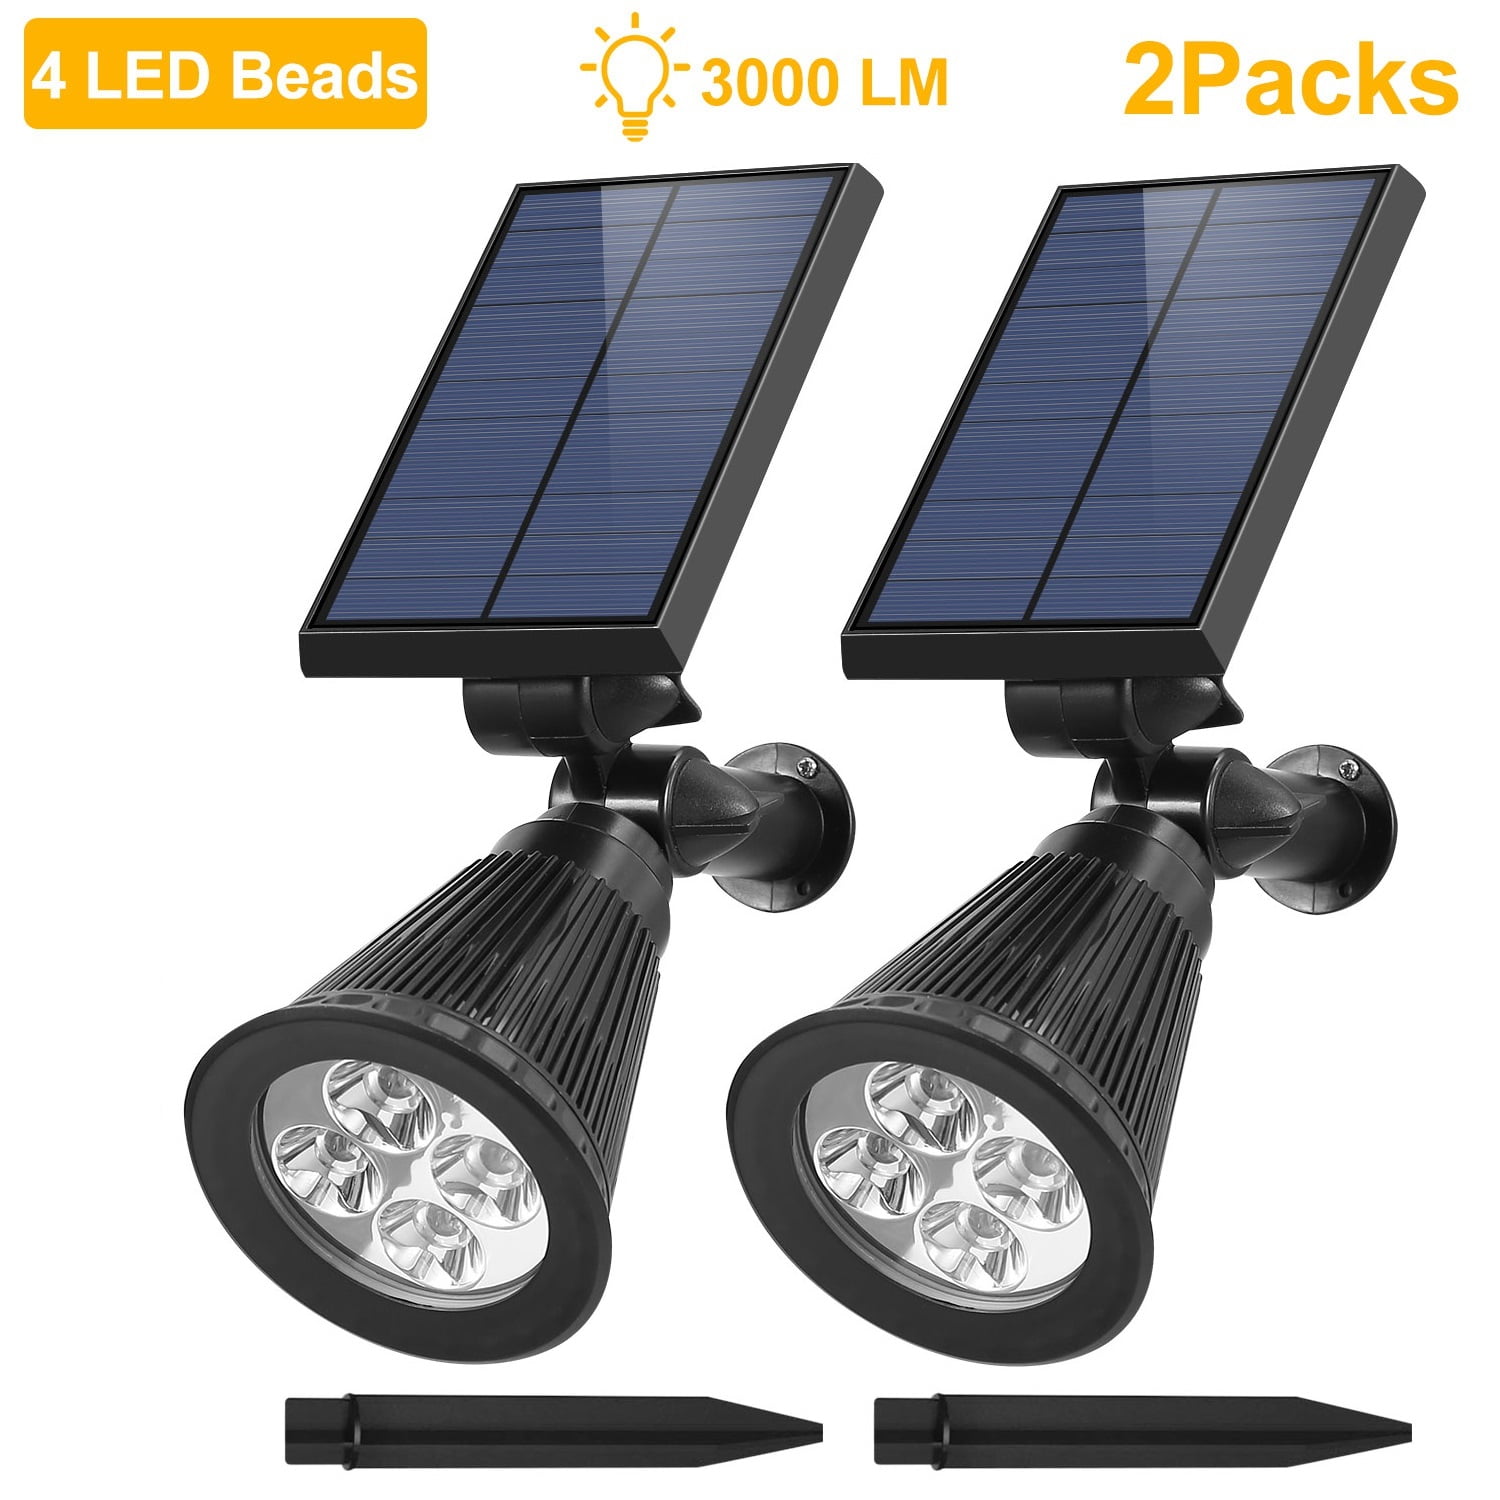 2 LED Solar Power Wall Light UP and Down Outdoor Sensor Lights Lamps Decor Q0O1 